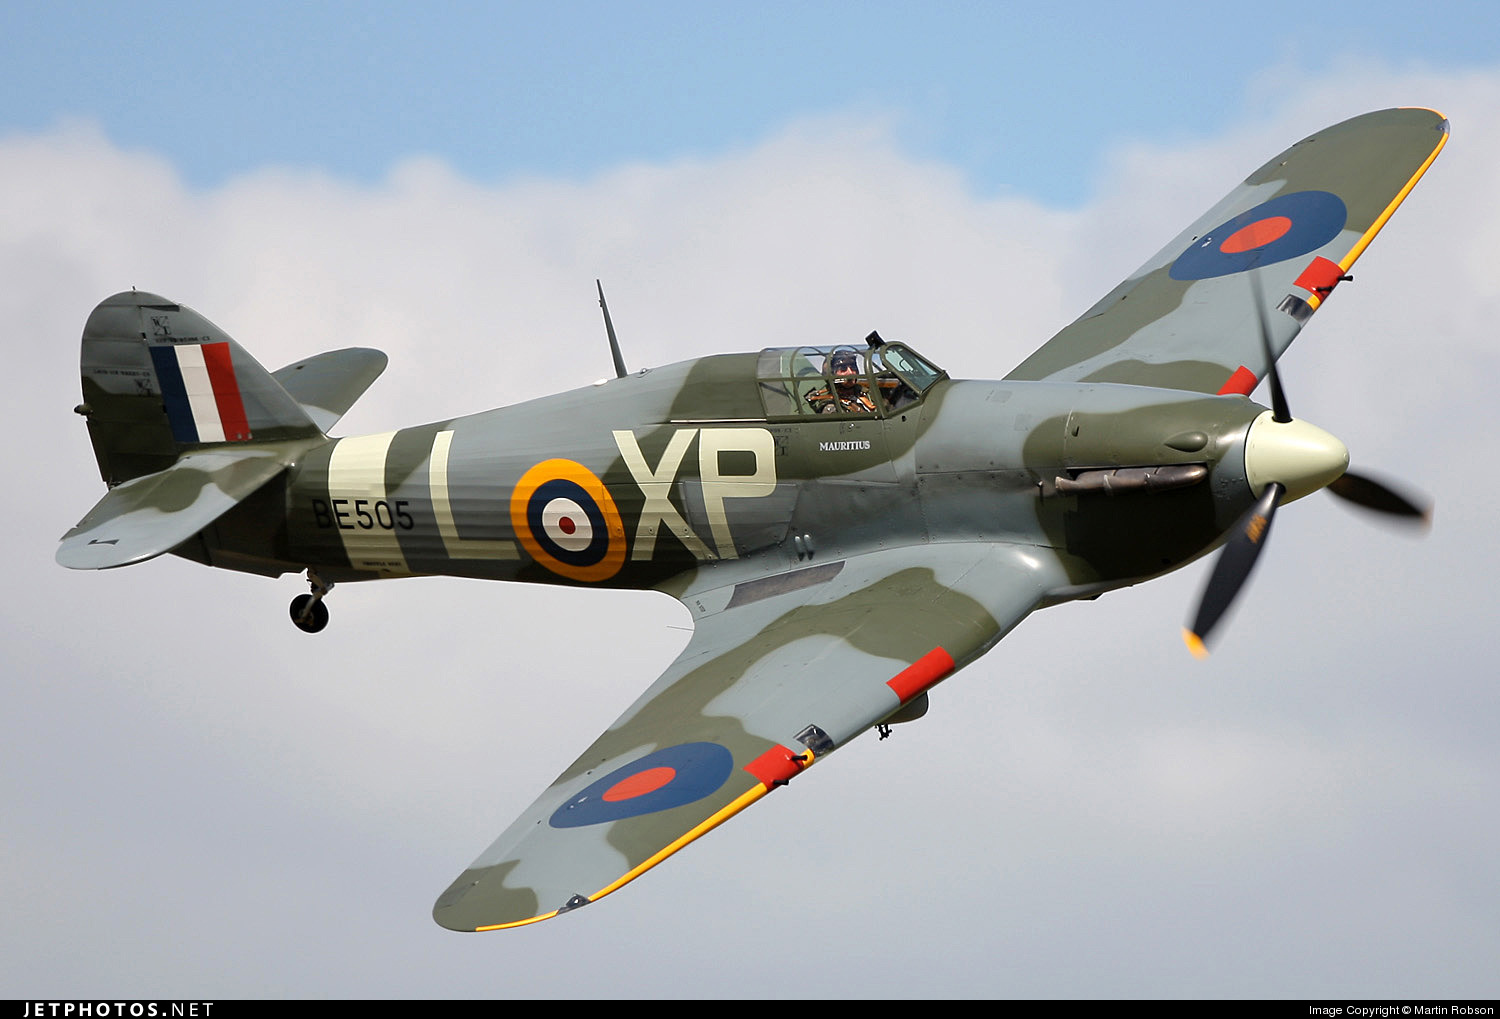 Amazing Hawker Hurricane Pictures & Backgrounds